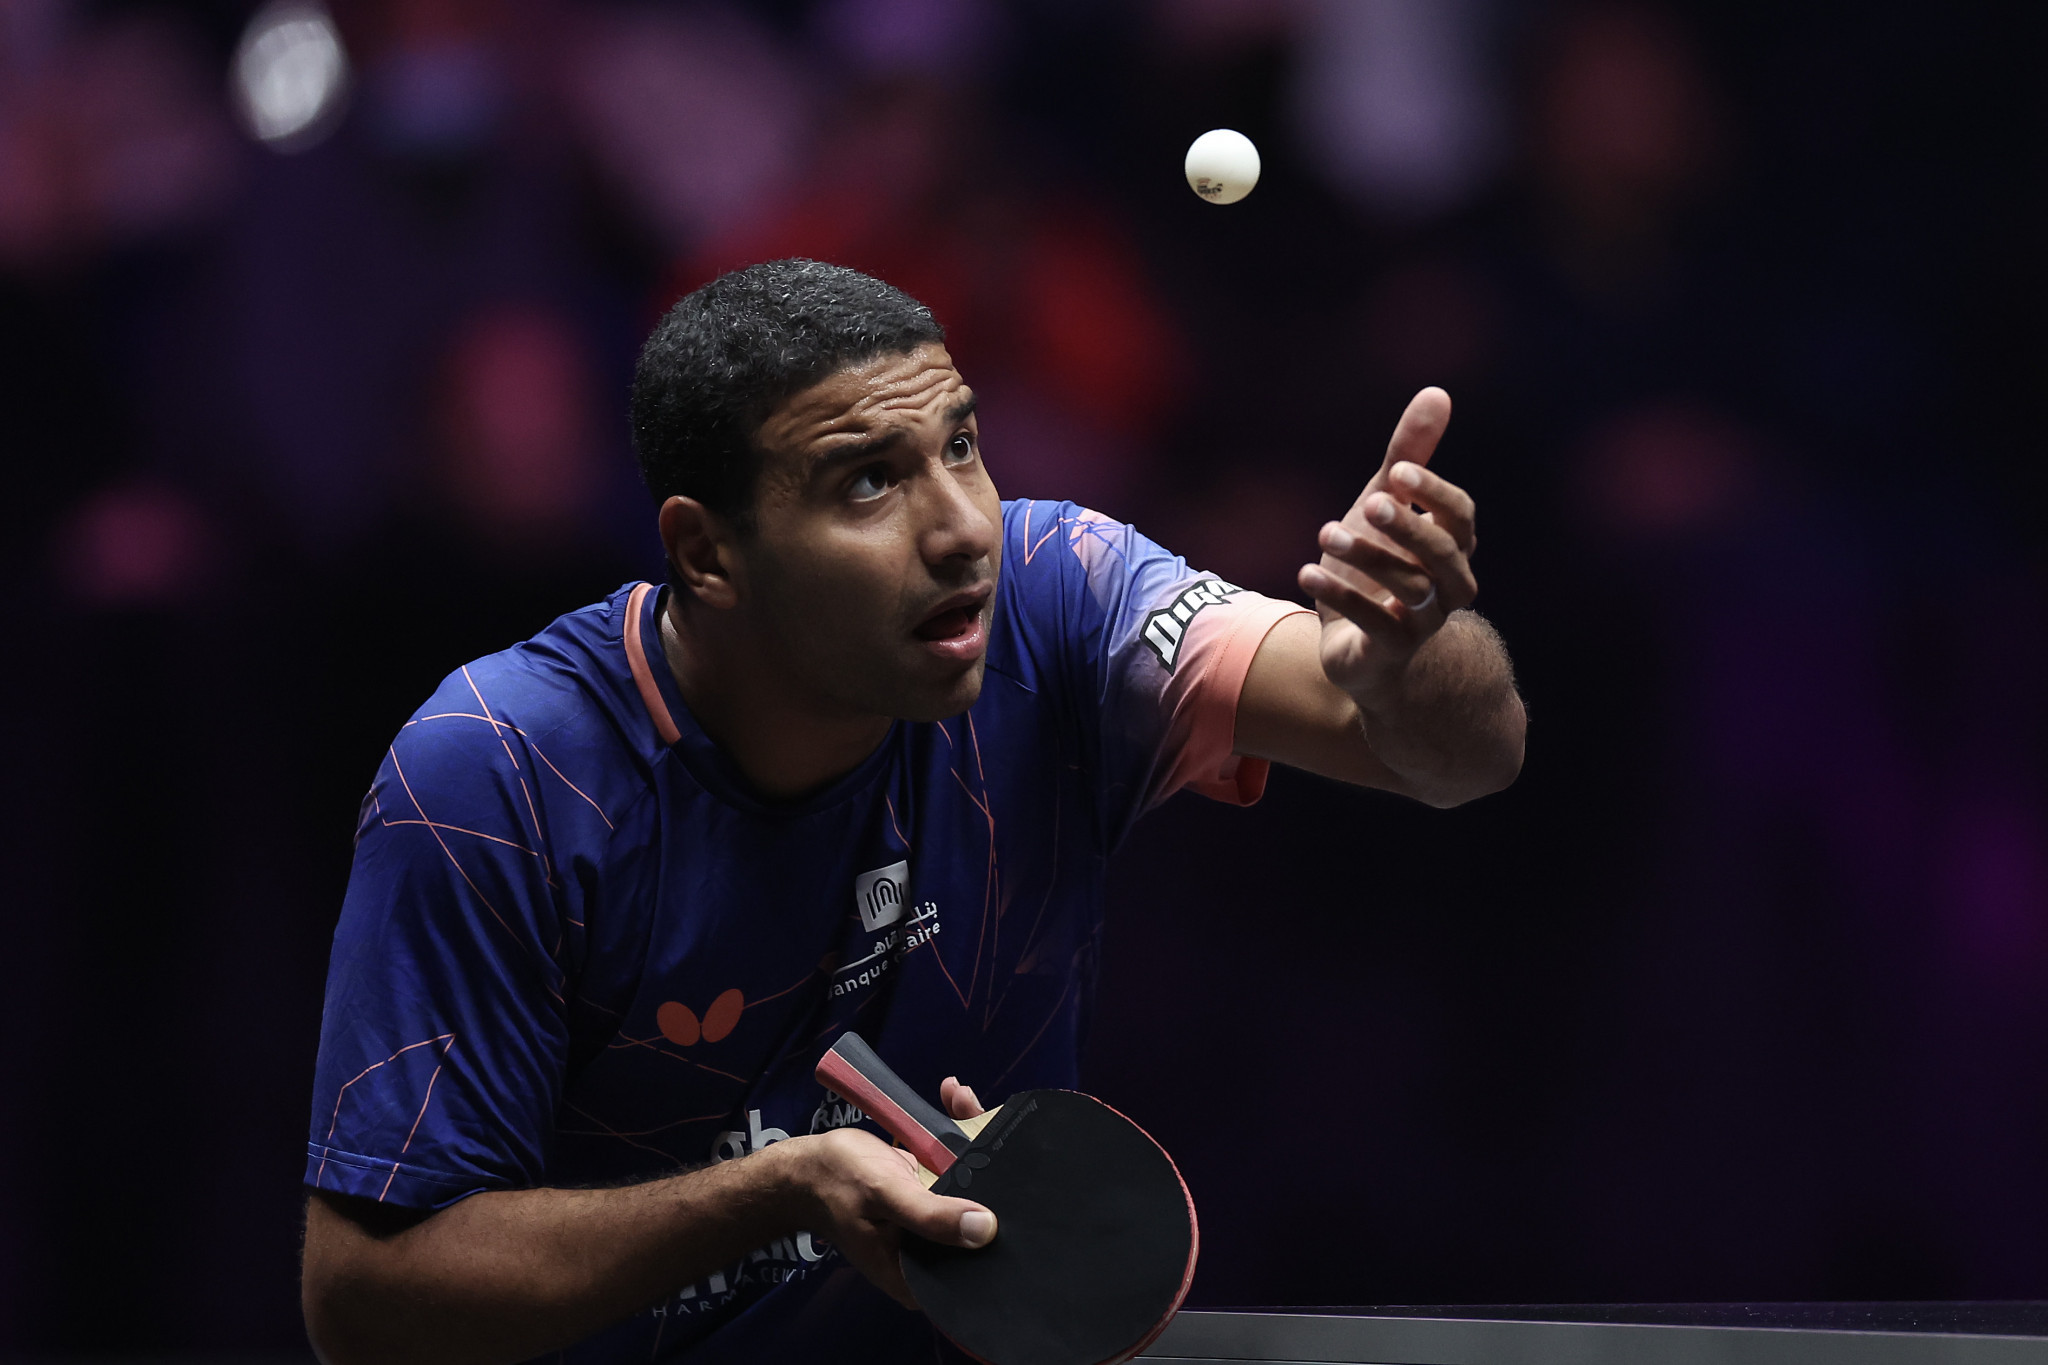 Assar becomes second African to reach World Table Tennis Championships quarter-finals 